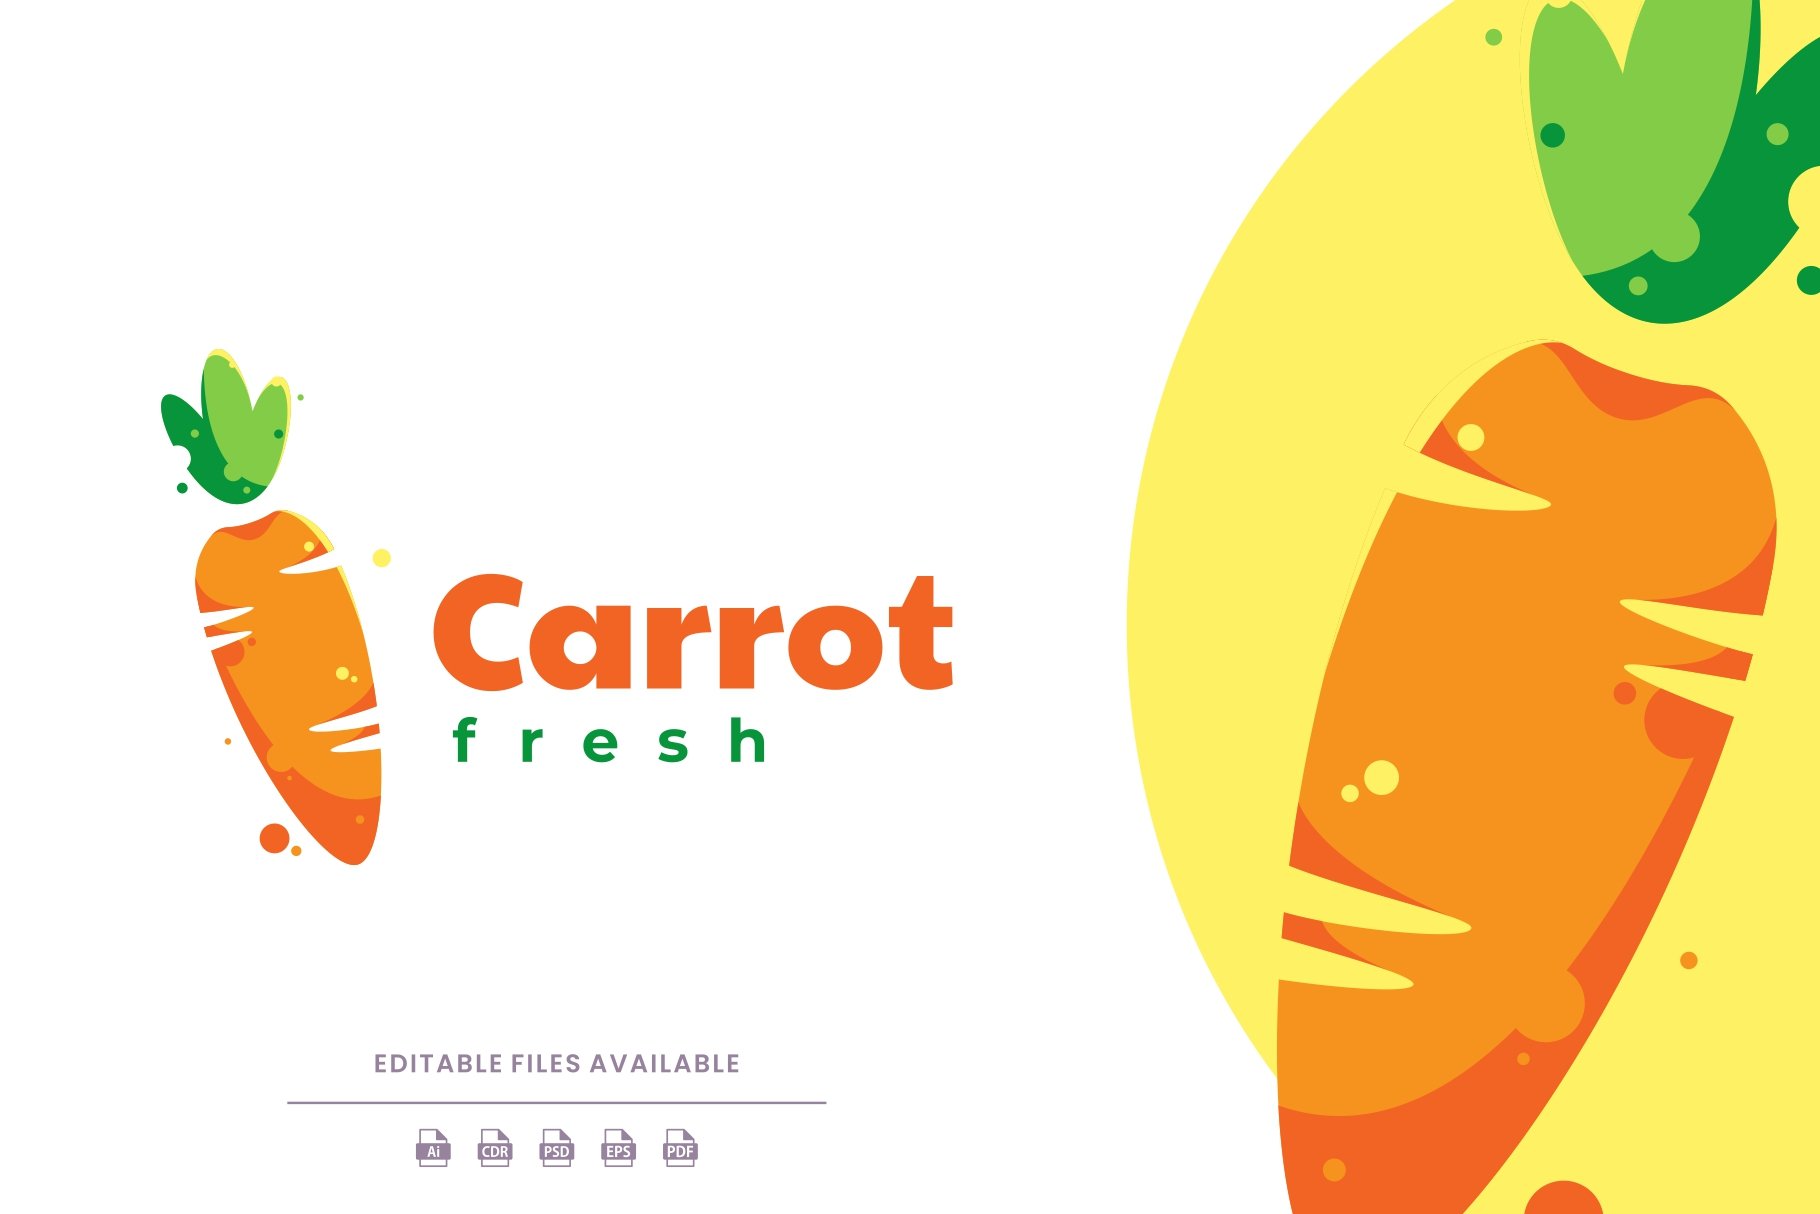 Carrot Color Logo cover image.